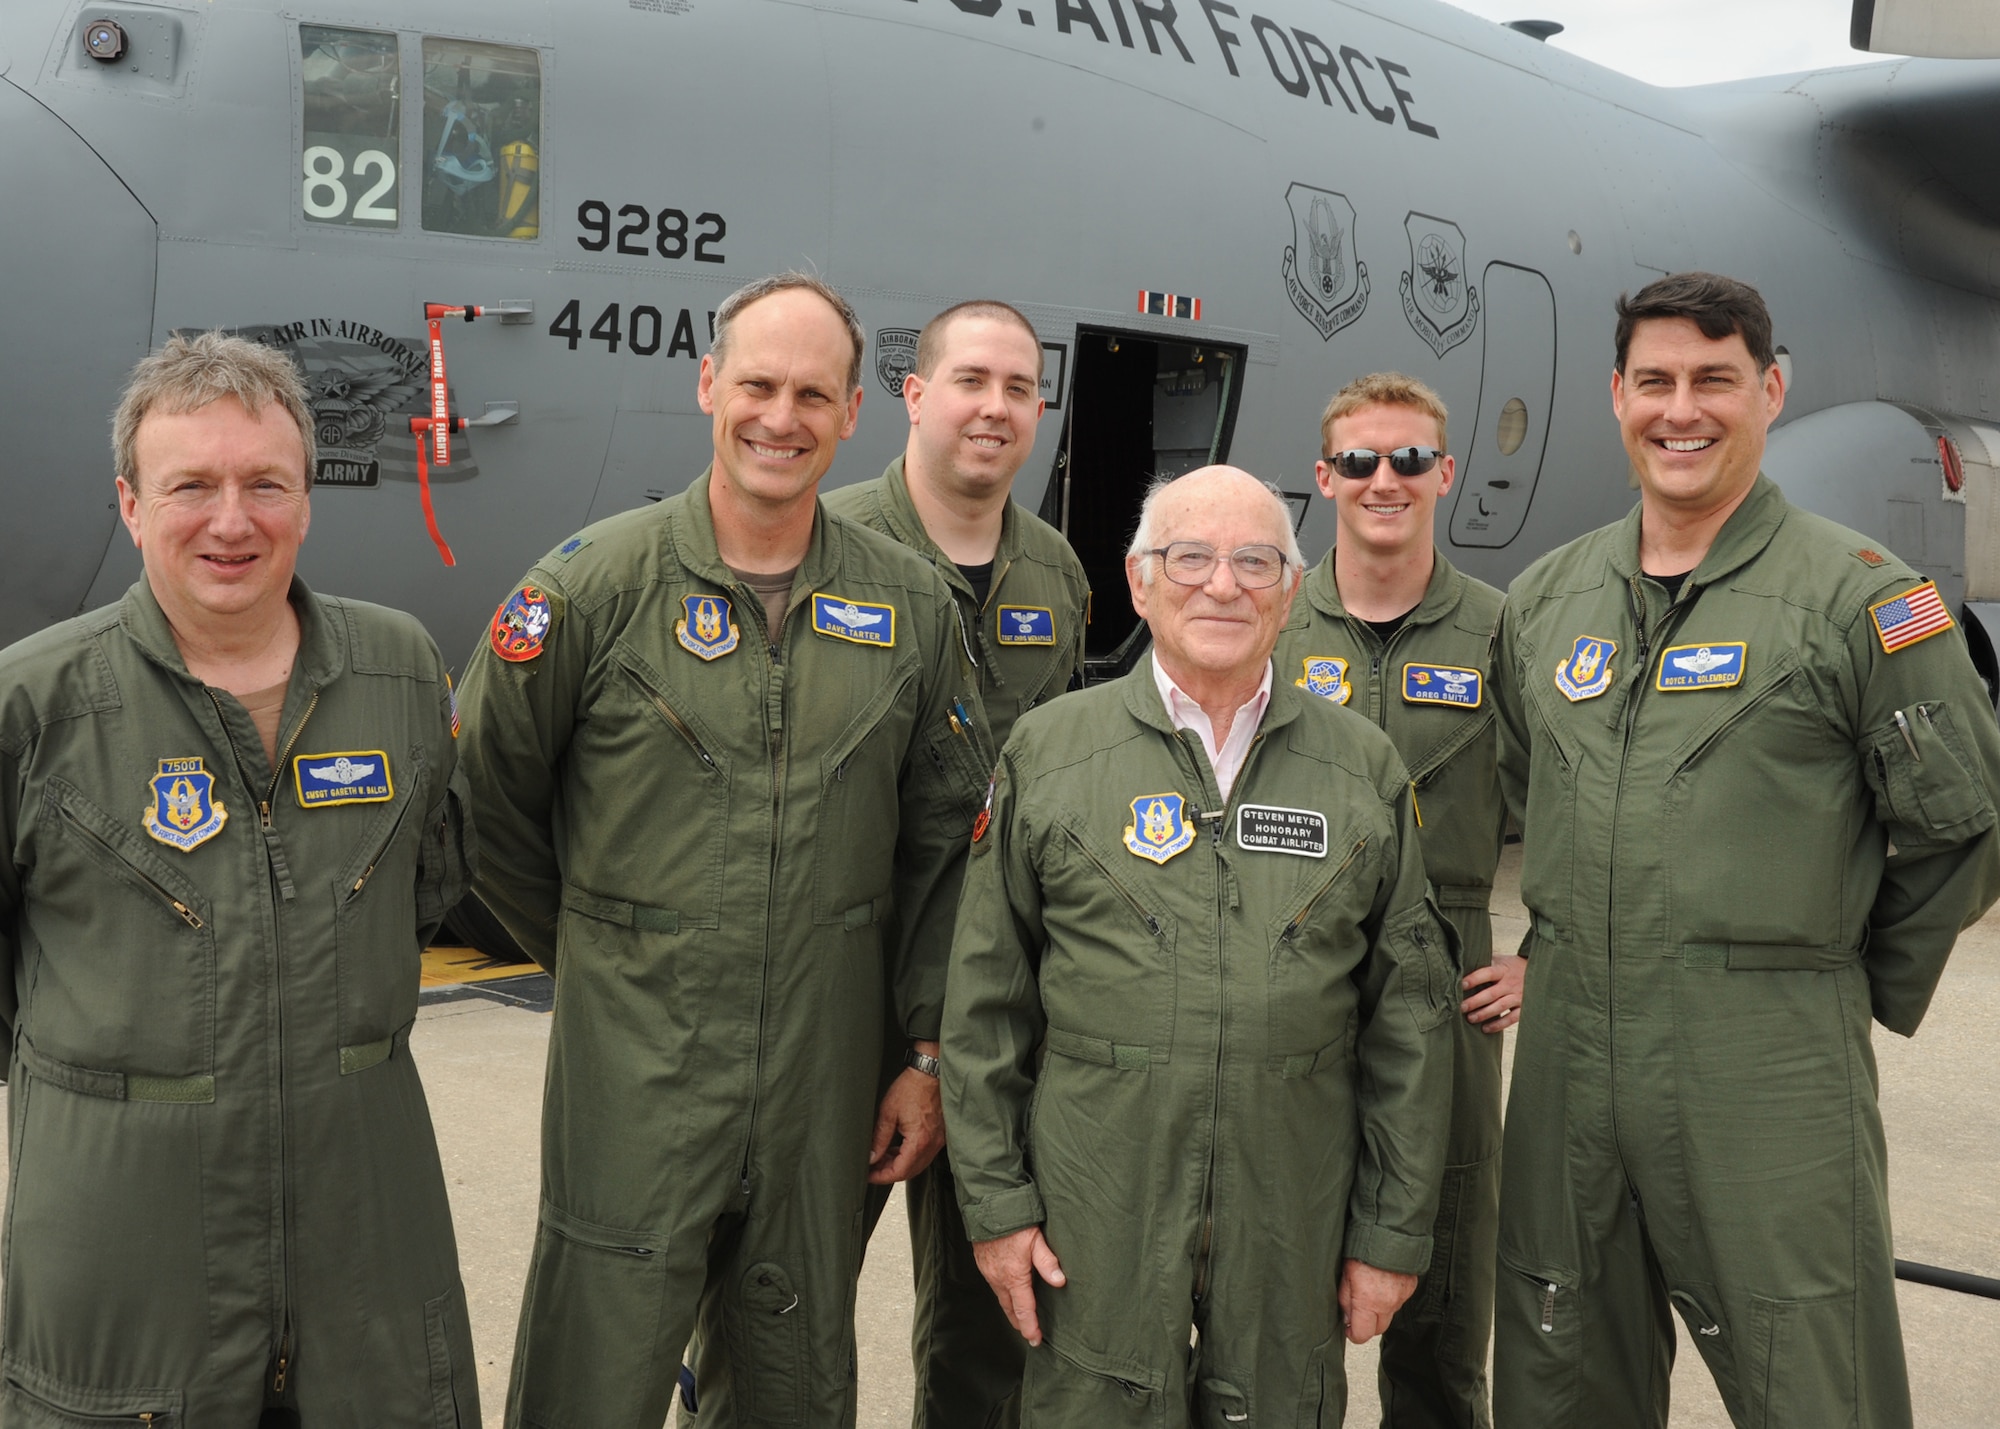 Steven Meyer, a World War II veteran, poses with the crew of the C-130H aircraft he marshaled into its parking location at Pope Field, N.C., on May 13, 2011.  Pictured from left to right are: Senior Master Sgt. Gareth Balch, Loadmaster, Lt. Col. Dave Tarter, pilot, Tech. Sgt. Chris Menapace, Flight Engineer,  Mr. Steven Meyer, 1st Lt. Greg Smith, Navigator and Maj. Royce Golembeck, Copilot.  Meyer served as a combat engineer in the European Theater of Operations and assited in the planning of the D-Day invasion at Normandy.  The event was coordinated through Jeremy Bloom’s Wish of a Lifetime foundation, Brookdale Senior Living and the Airmen of the 440th Airlift Wing.  “This is beyond my wildest dreams,” said Meyer, “and, by all accounts my reviews were very positive.  I believe I did quite well.”  (U.S. Air Force photo by Staff Sgt. Peter R. Miller)